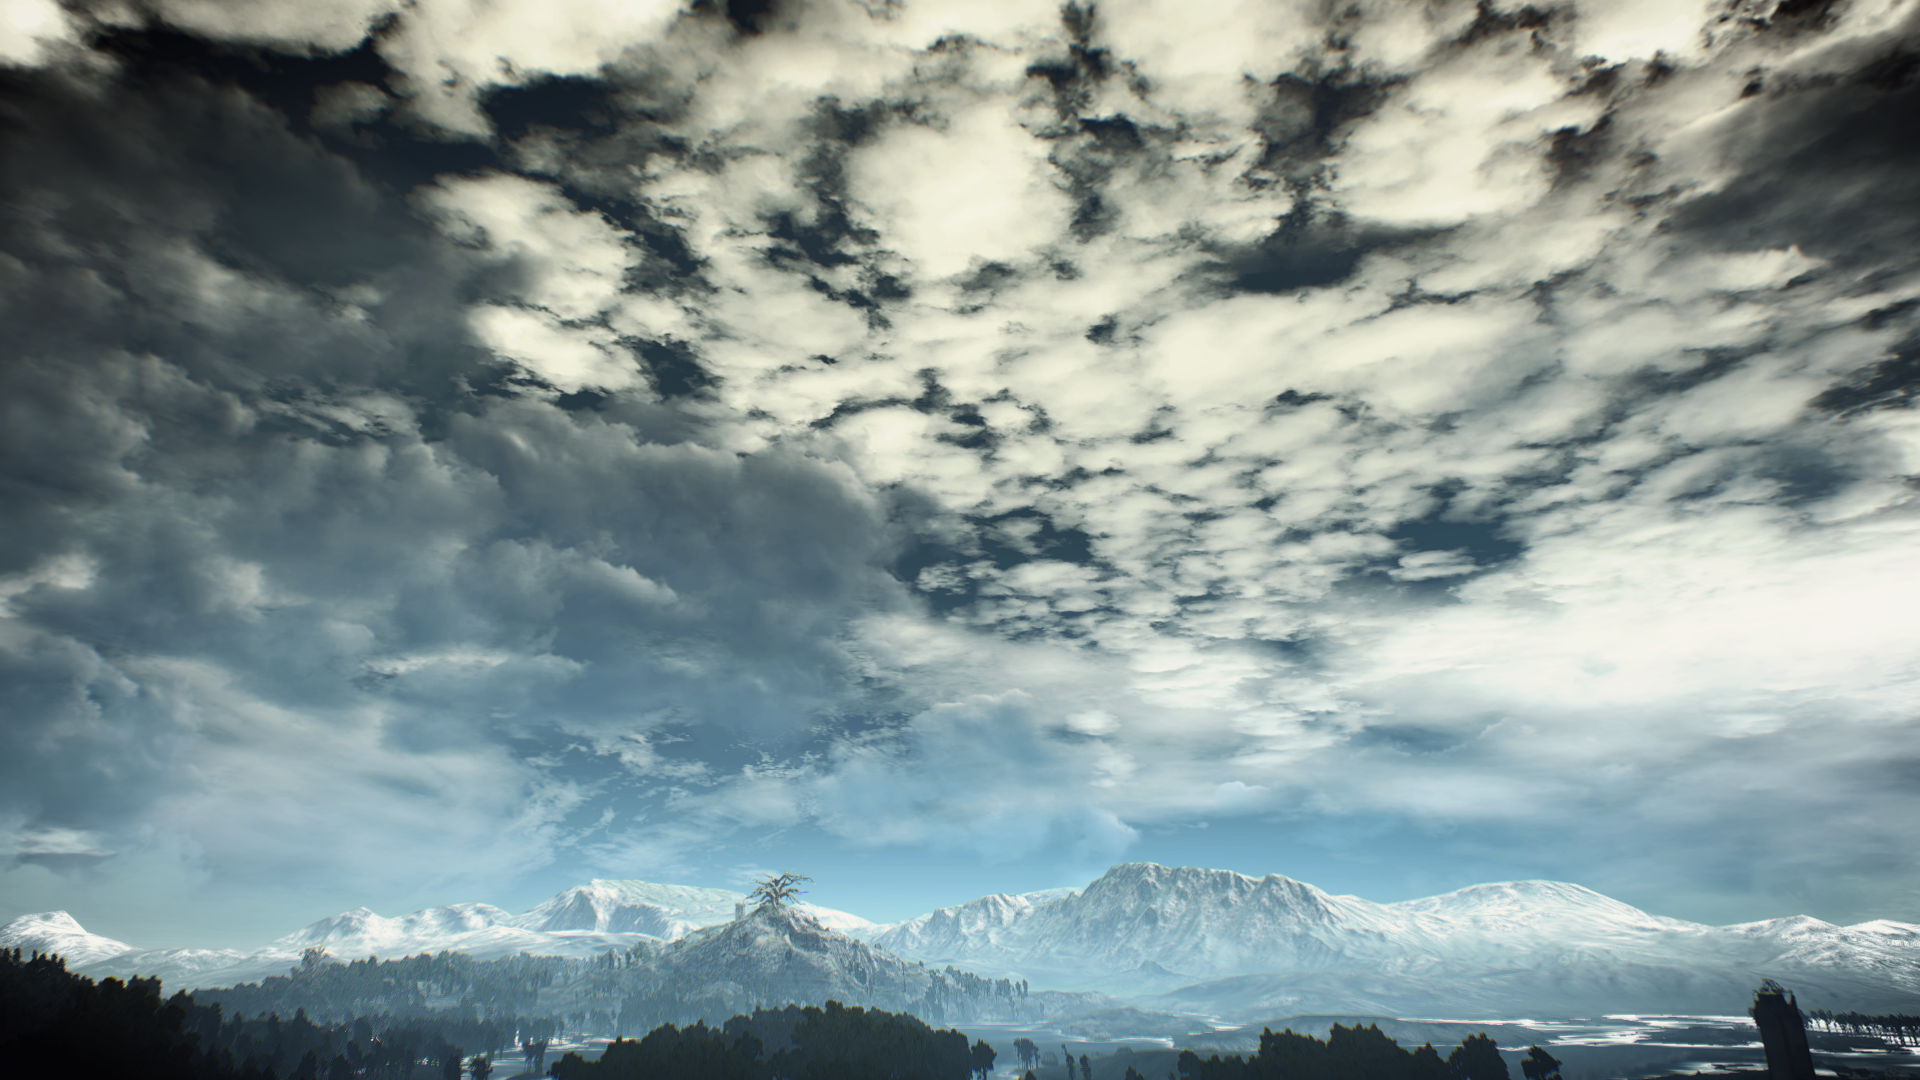 General 1920x1080 The Witcher 3: Wild Hunt video games PC gaming screen shot video game landscape RPG sky mountains